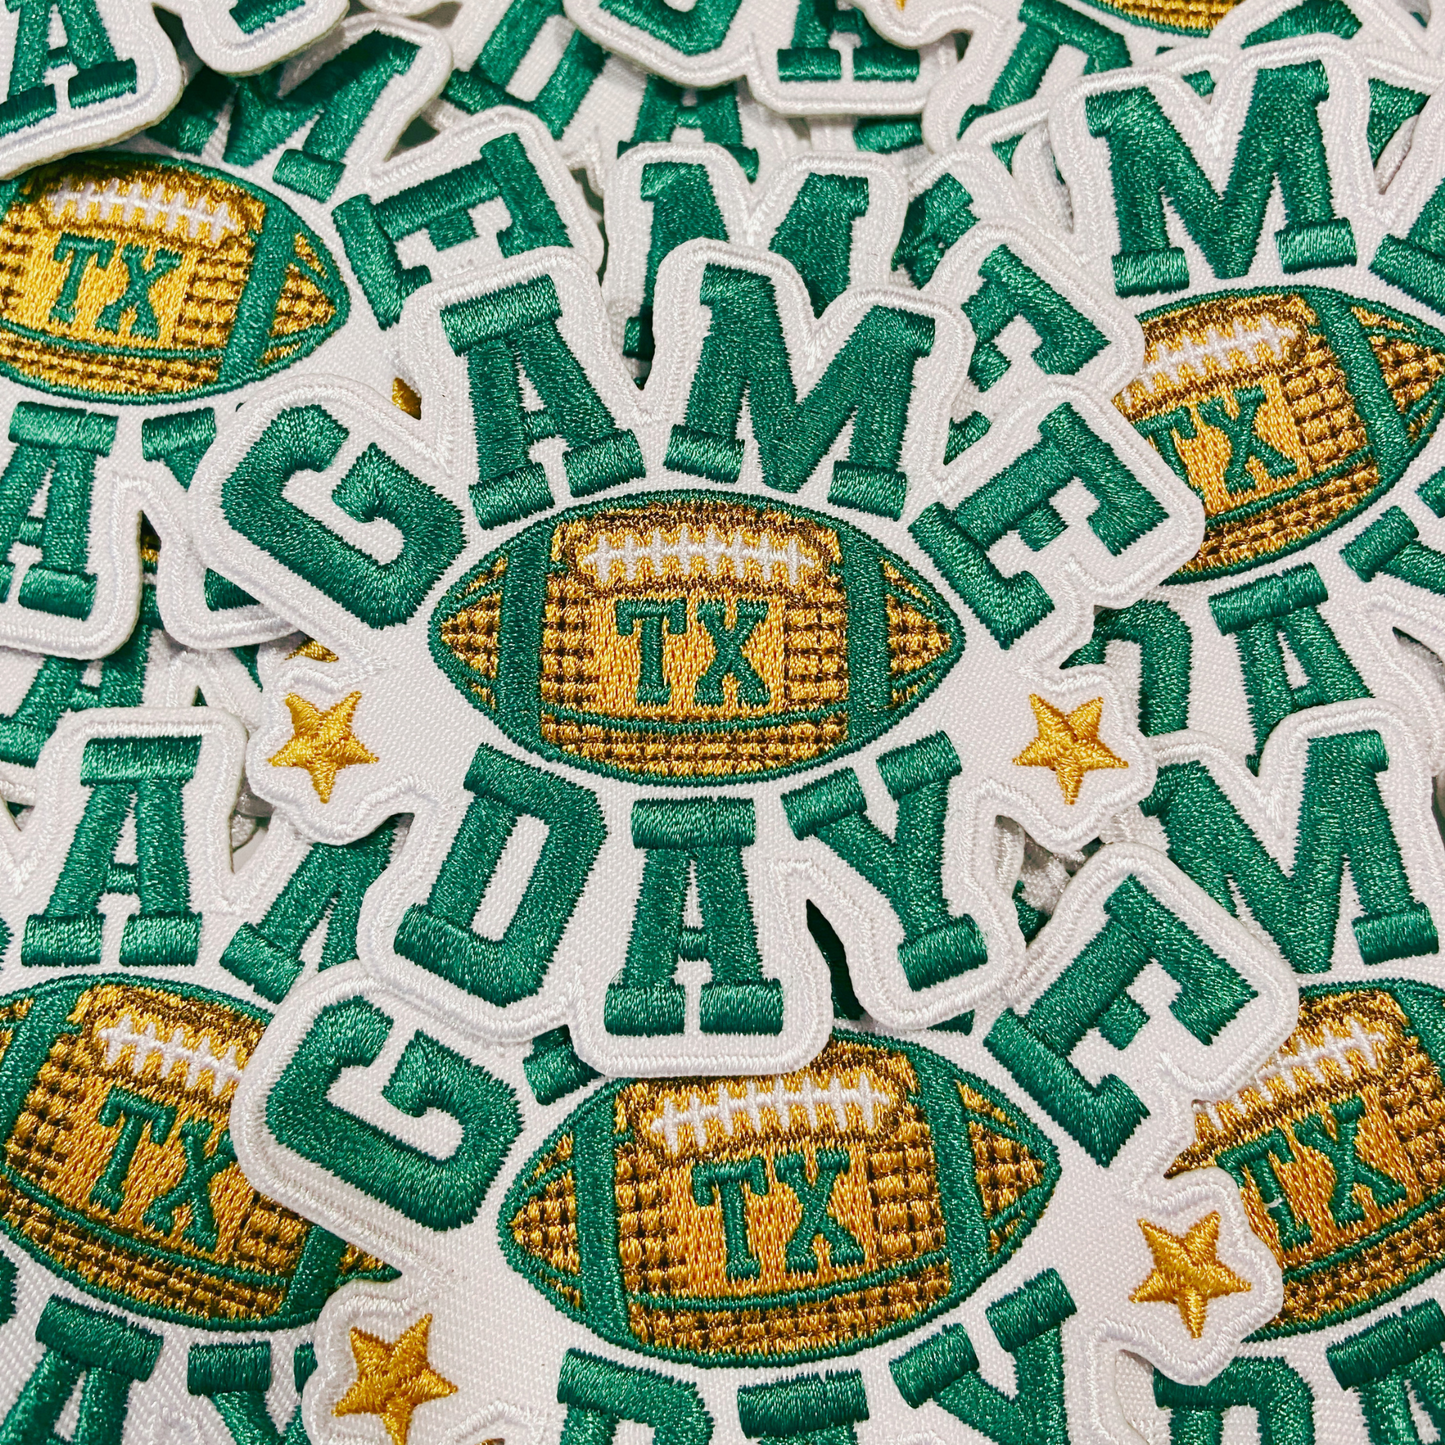 3"  GAME DAY Texas football in Green -  Embroidered Hat Patch